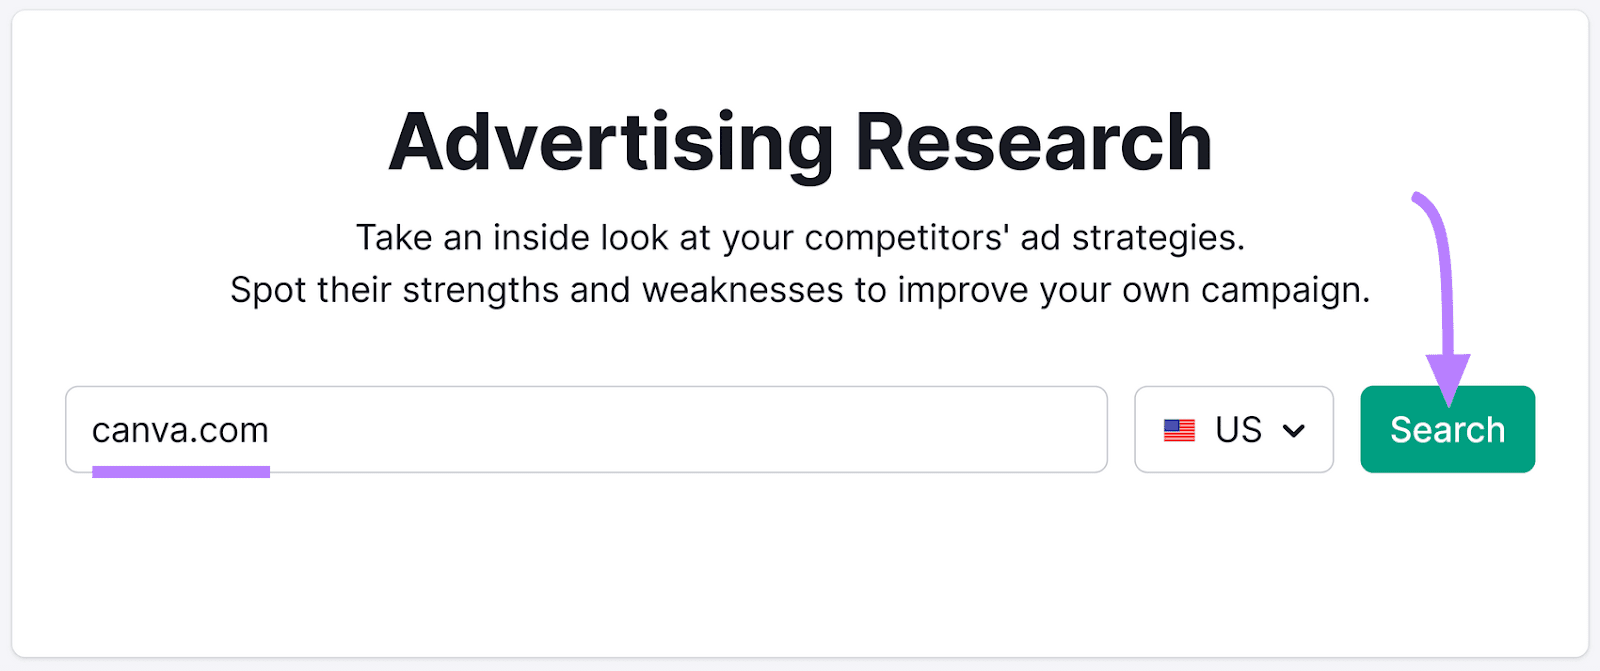 "canva.com" entered into the Advertising Research tool search bar